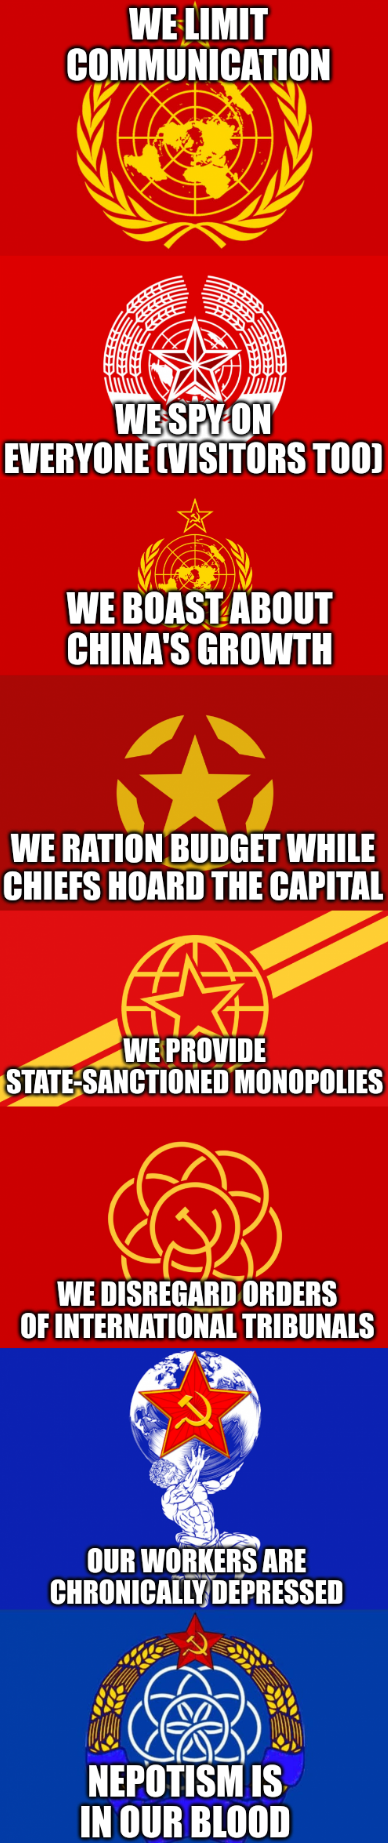 Socialist World Republic flags: We limit communication, we spy on everyone (visitors too), we boast about China's growth, we ration budget while chiefs hoard the capital, we provide state-sanctioned monopolies, we disregard orders of international tribunals, our workers are chronically depressed, nepotism is in our blood